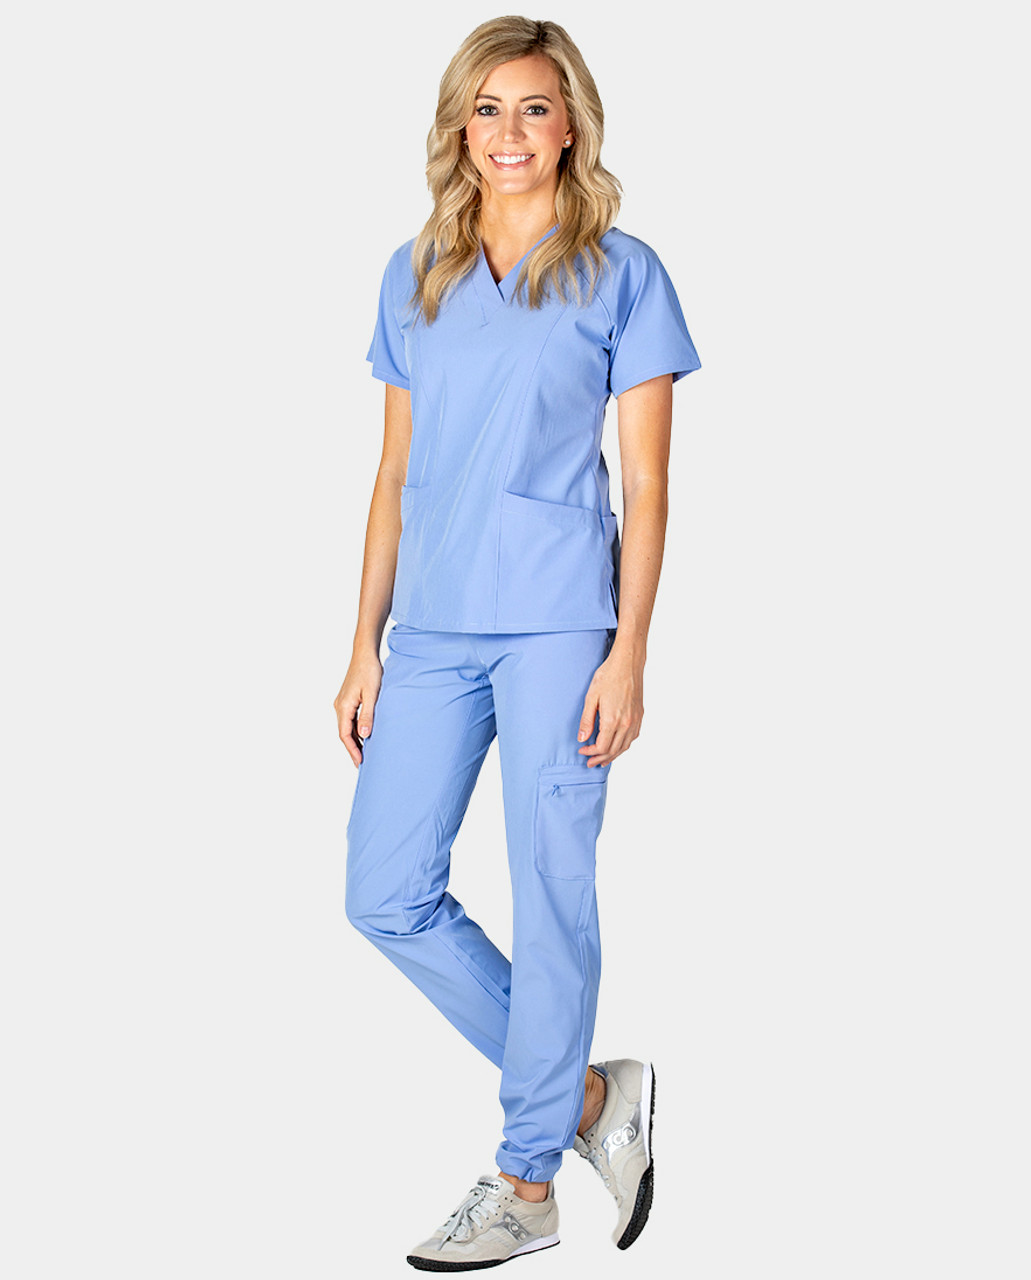 c-guard® Female's sky blue french jogger scrub suit_ s Pant, Shirt Hospital  Scrub Price in India - Buy c-guard® Female's sky blue french jogger scrub  suit_ s Pant, Shirt Hospital Scrub online